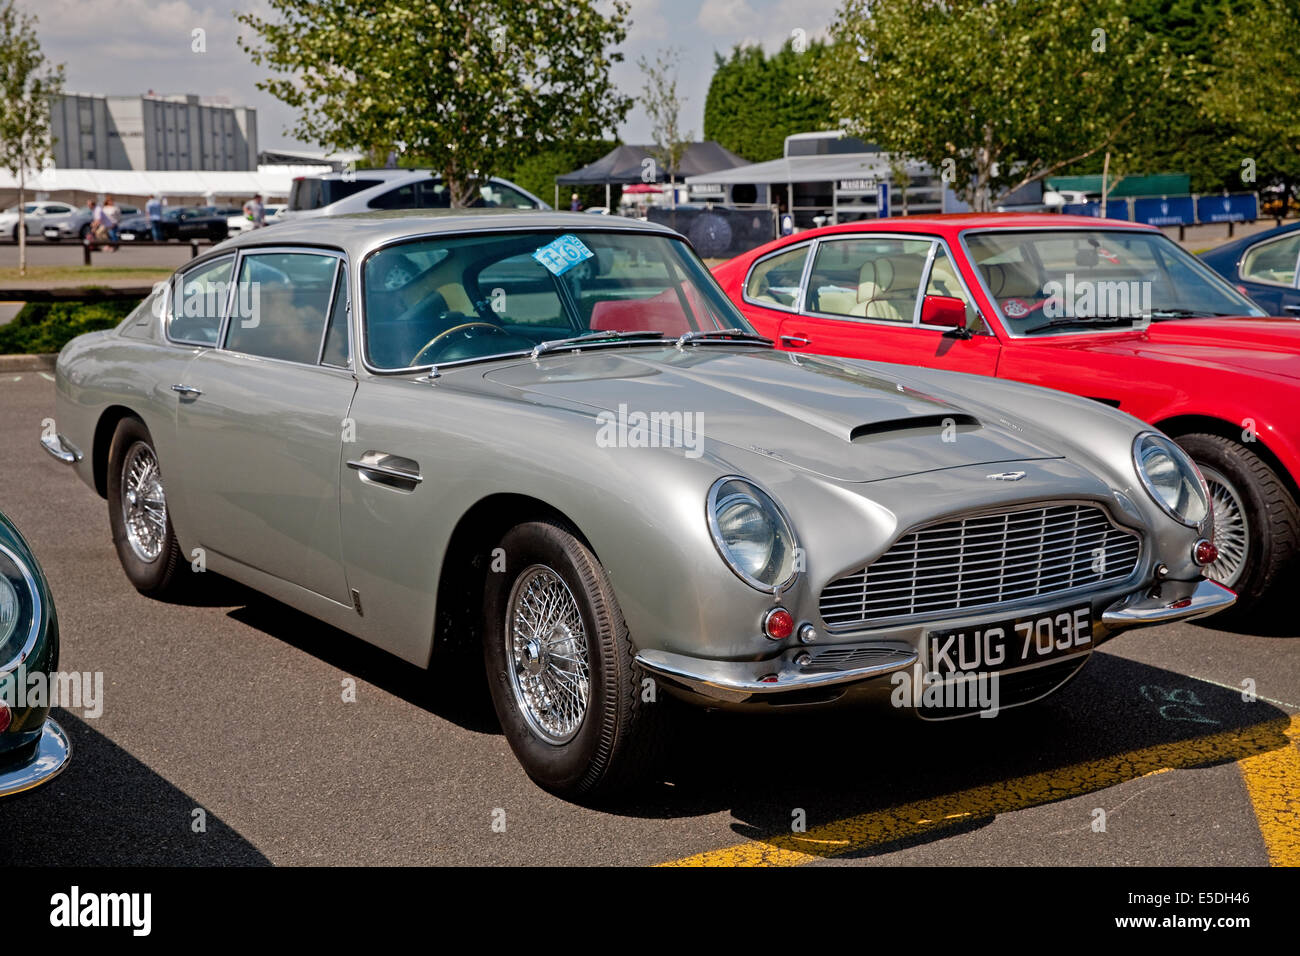 Aston Martin db6 3995cc built in 1967 at Silverstone on Classic car Day Stock Photo